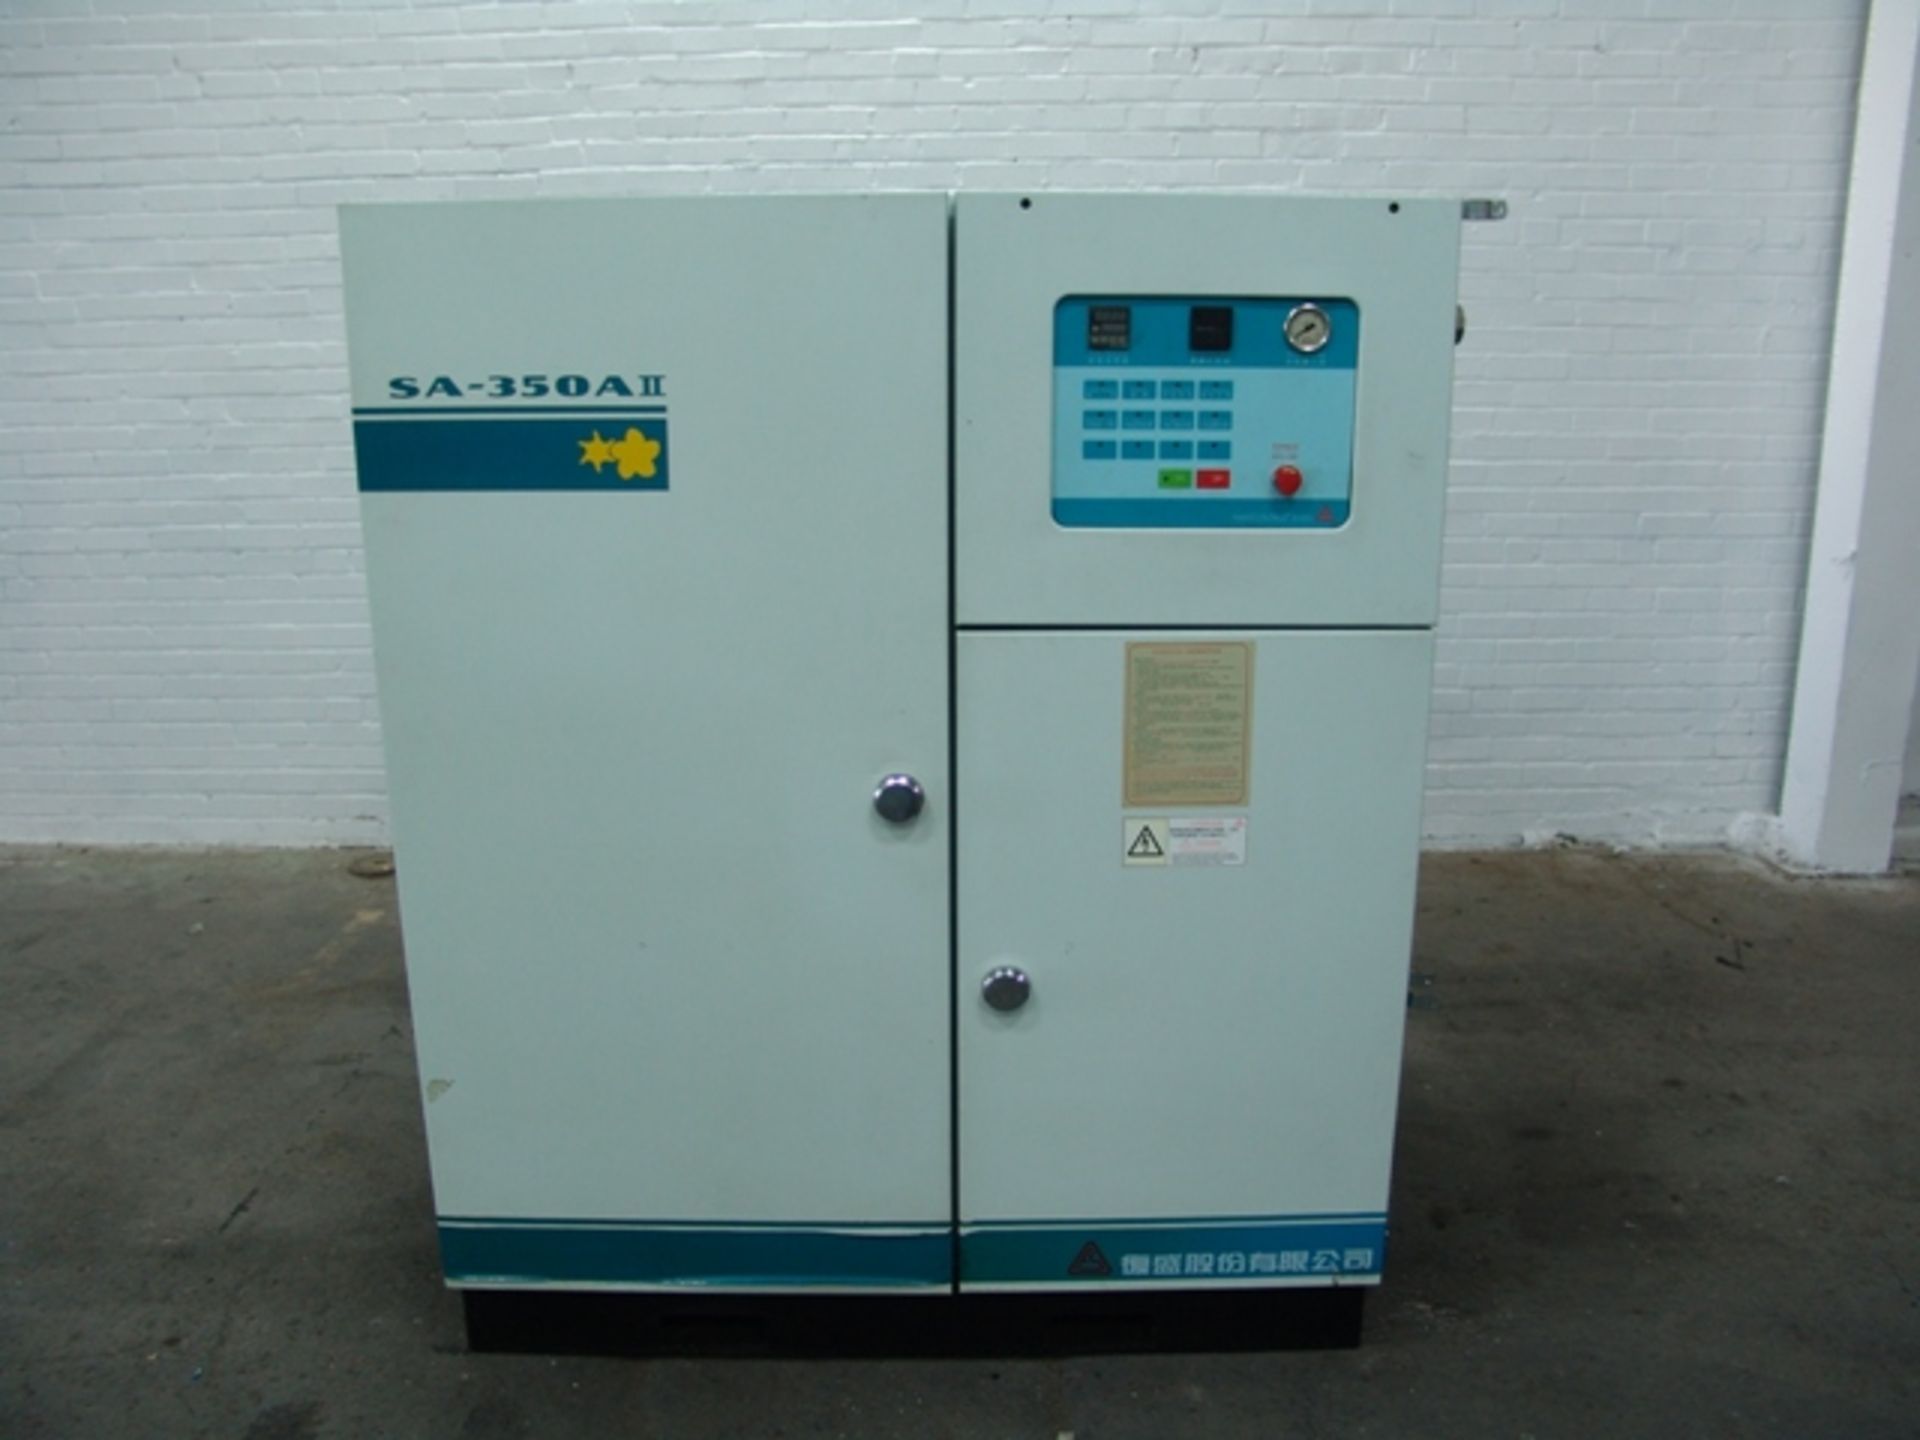 50 HP Rotary Screw Air Compressor  - RIGGING AND HANDLING FEES: $140